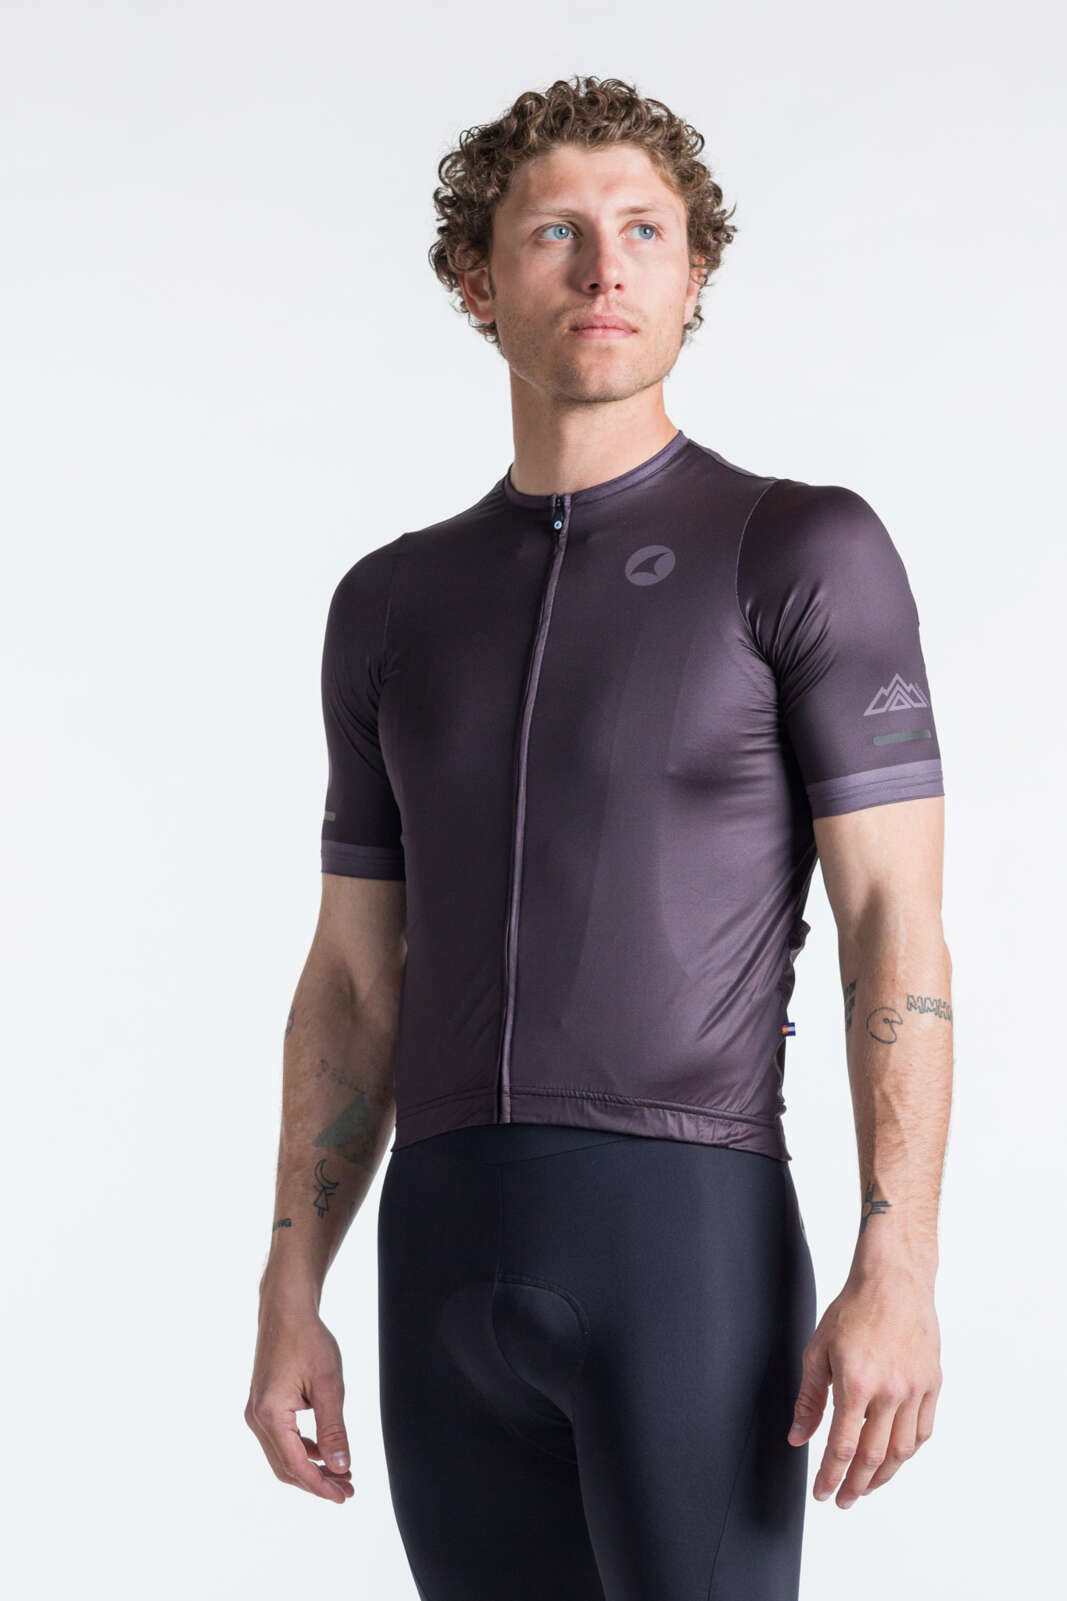 Men's Best Black Cycling Jersey - Summit Front View